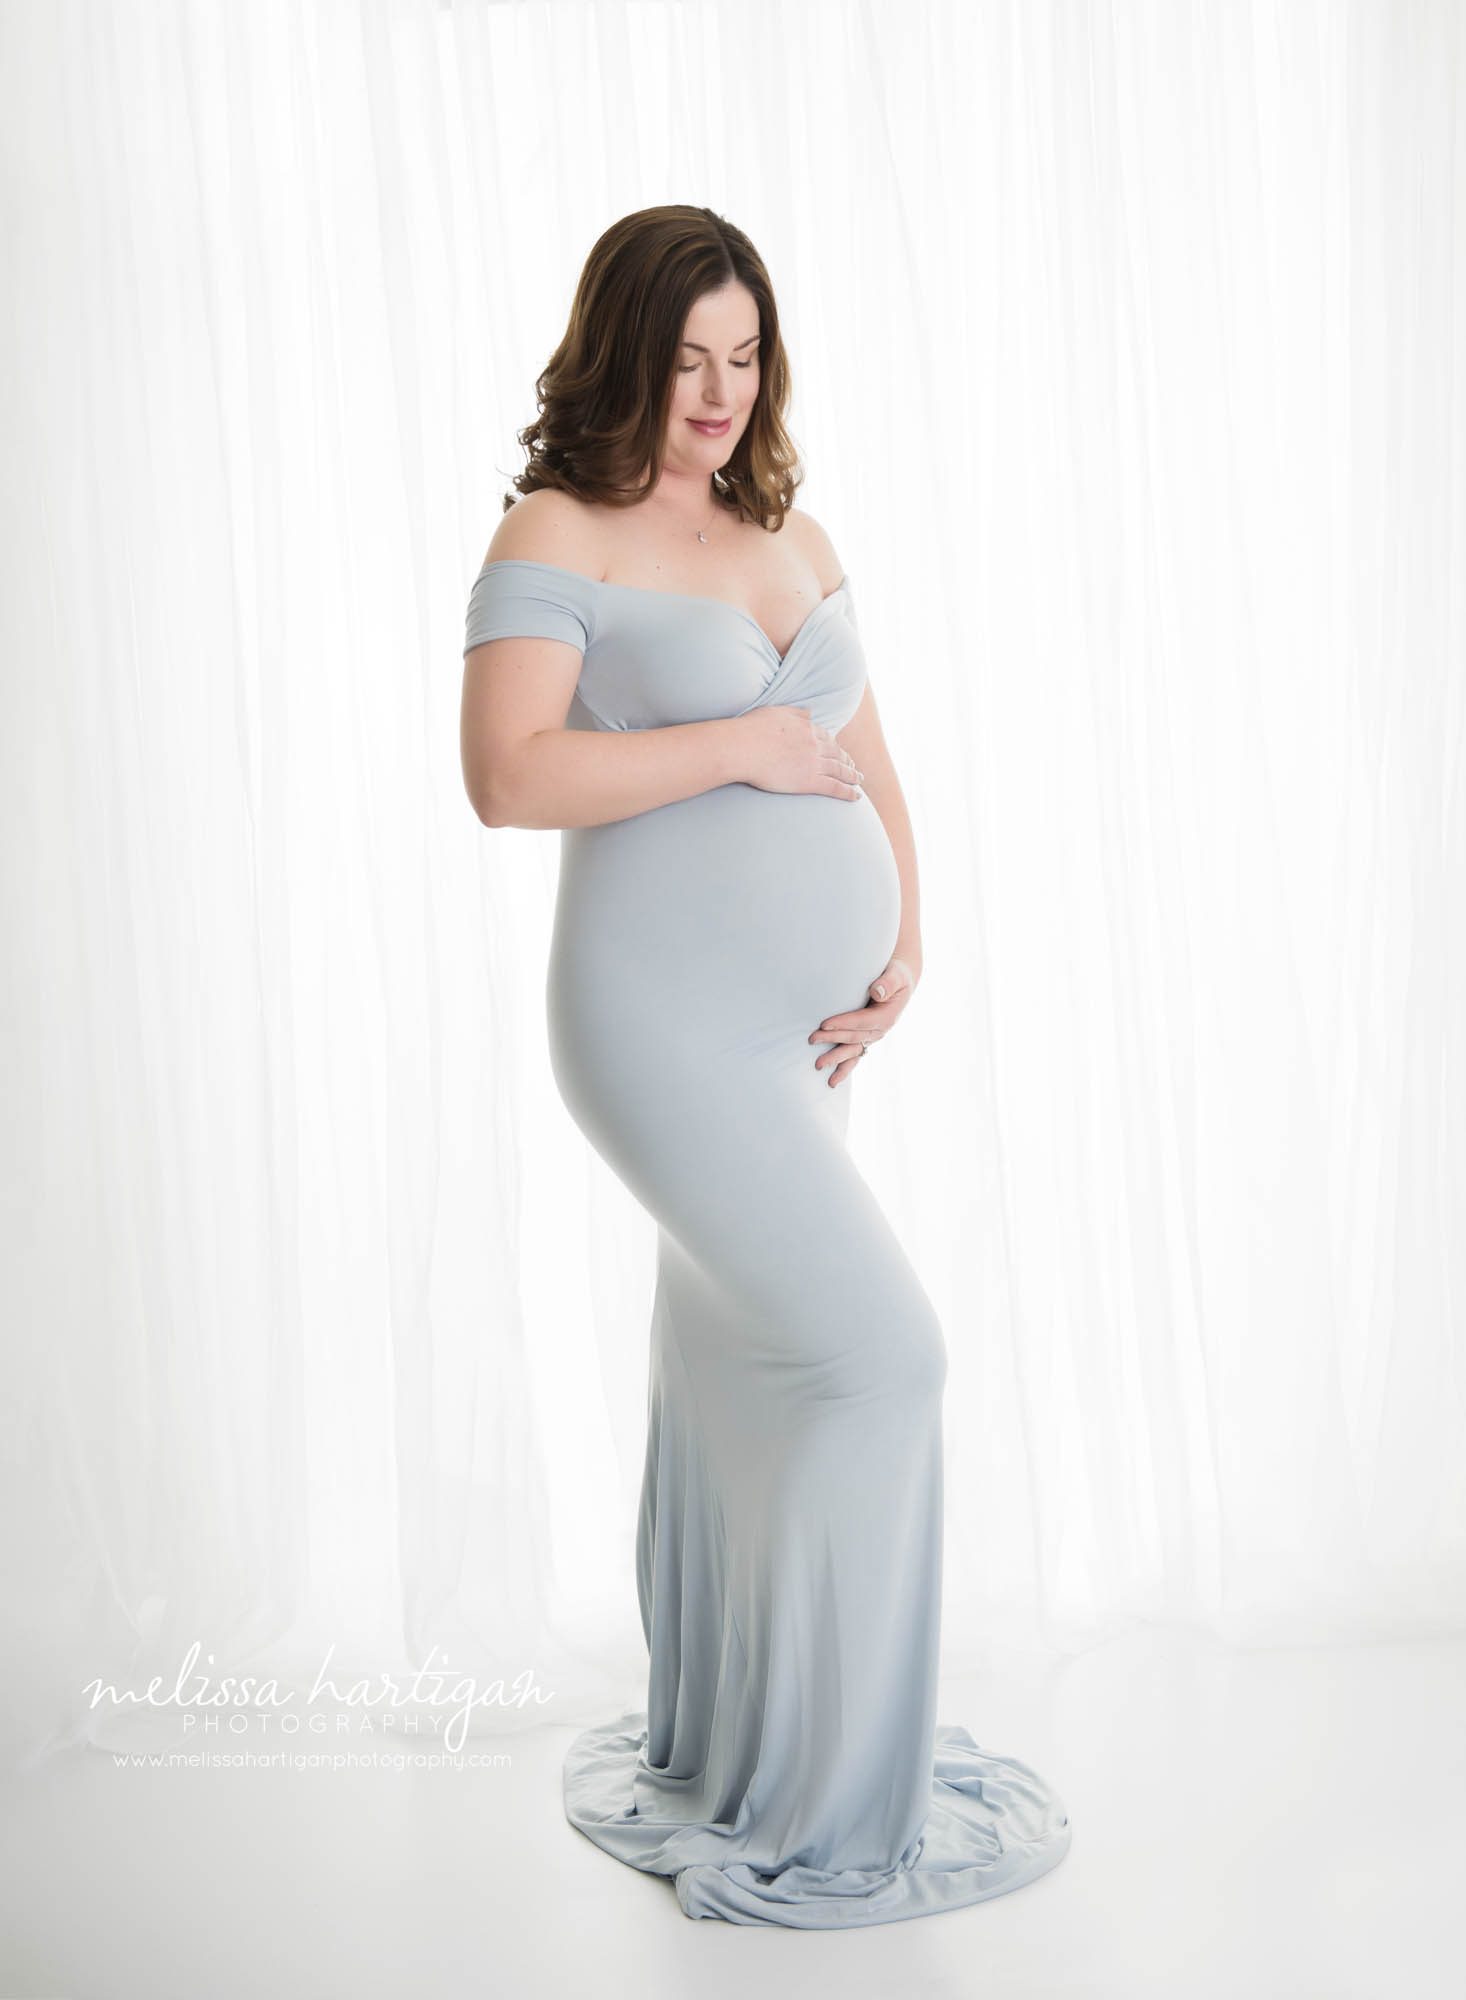 studio maternity session with pregnant mom holding baby bump ooking down at baby bump